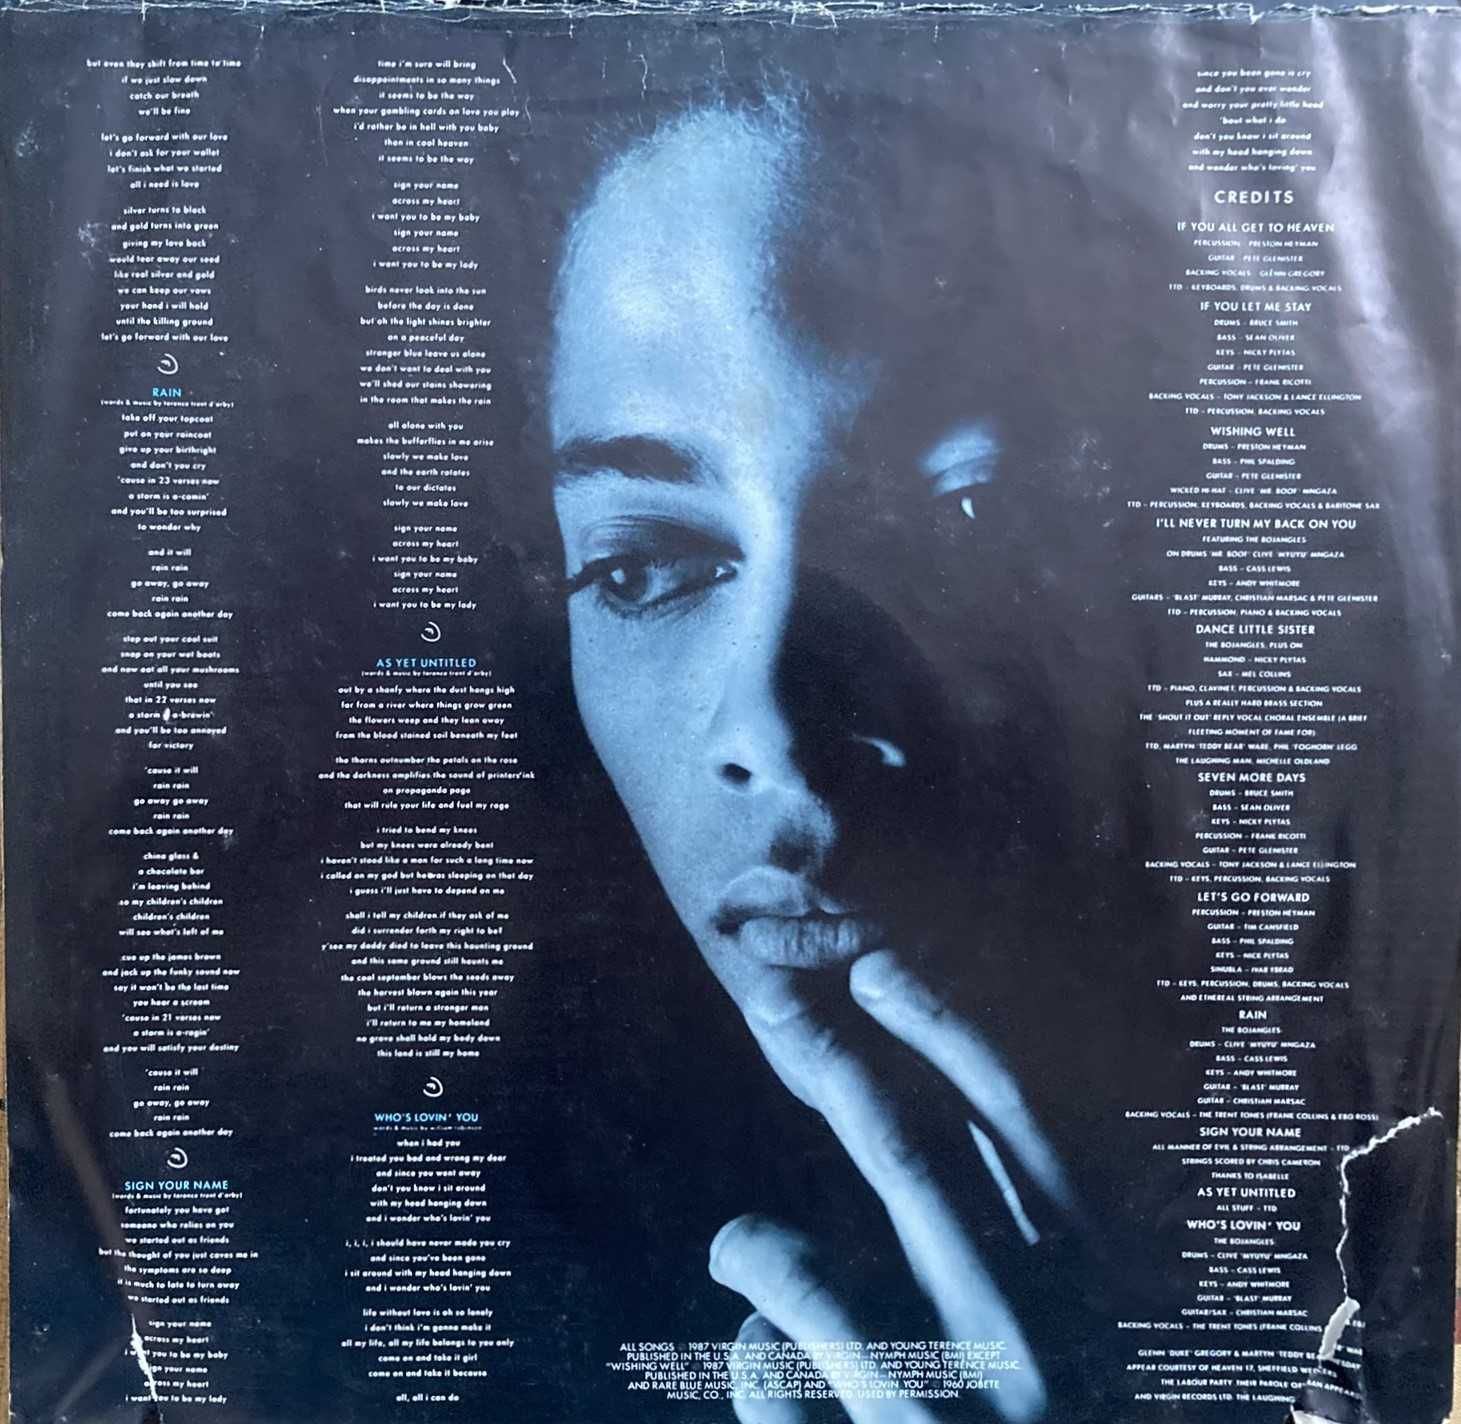 Terence Trent D'ARBY - Introducing the hardline